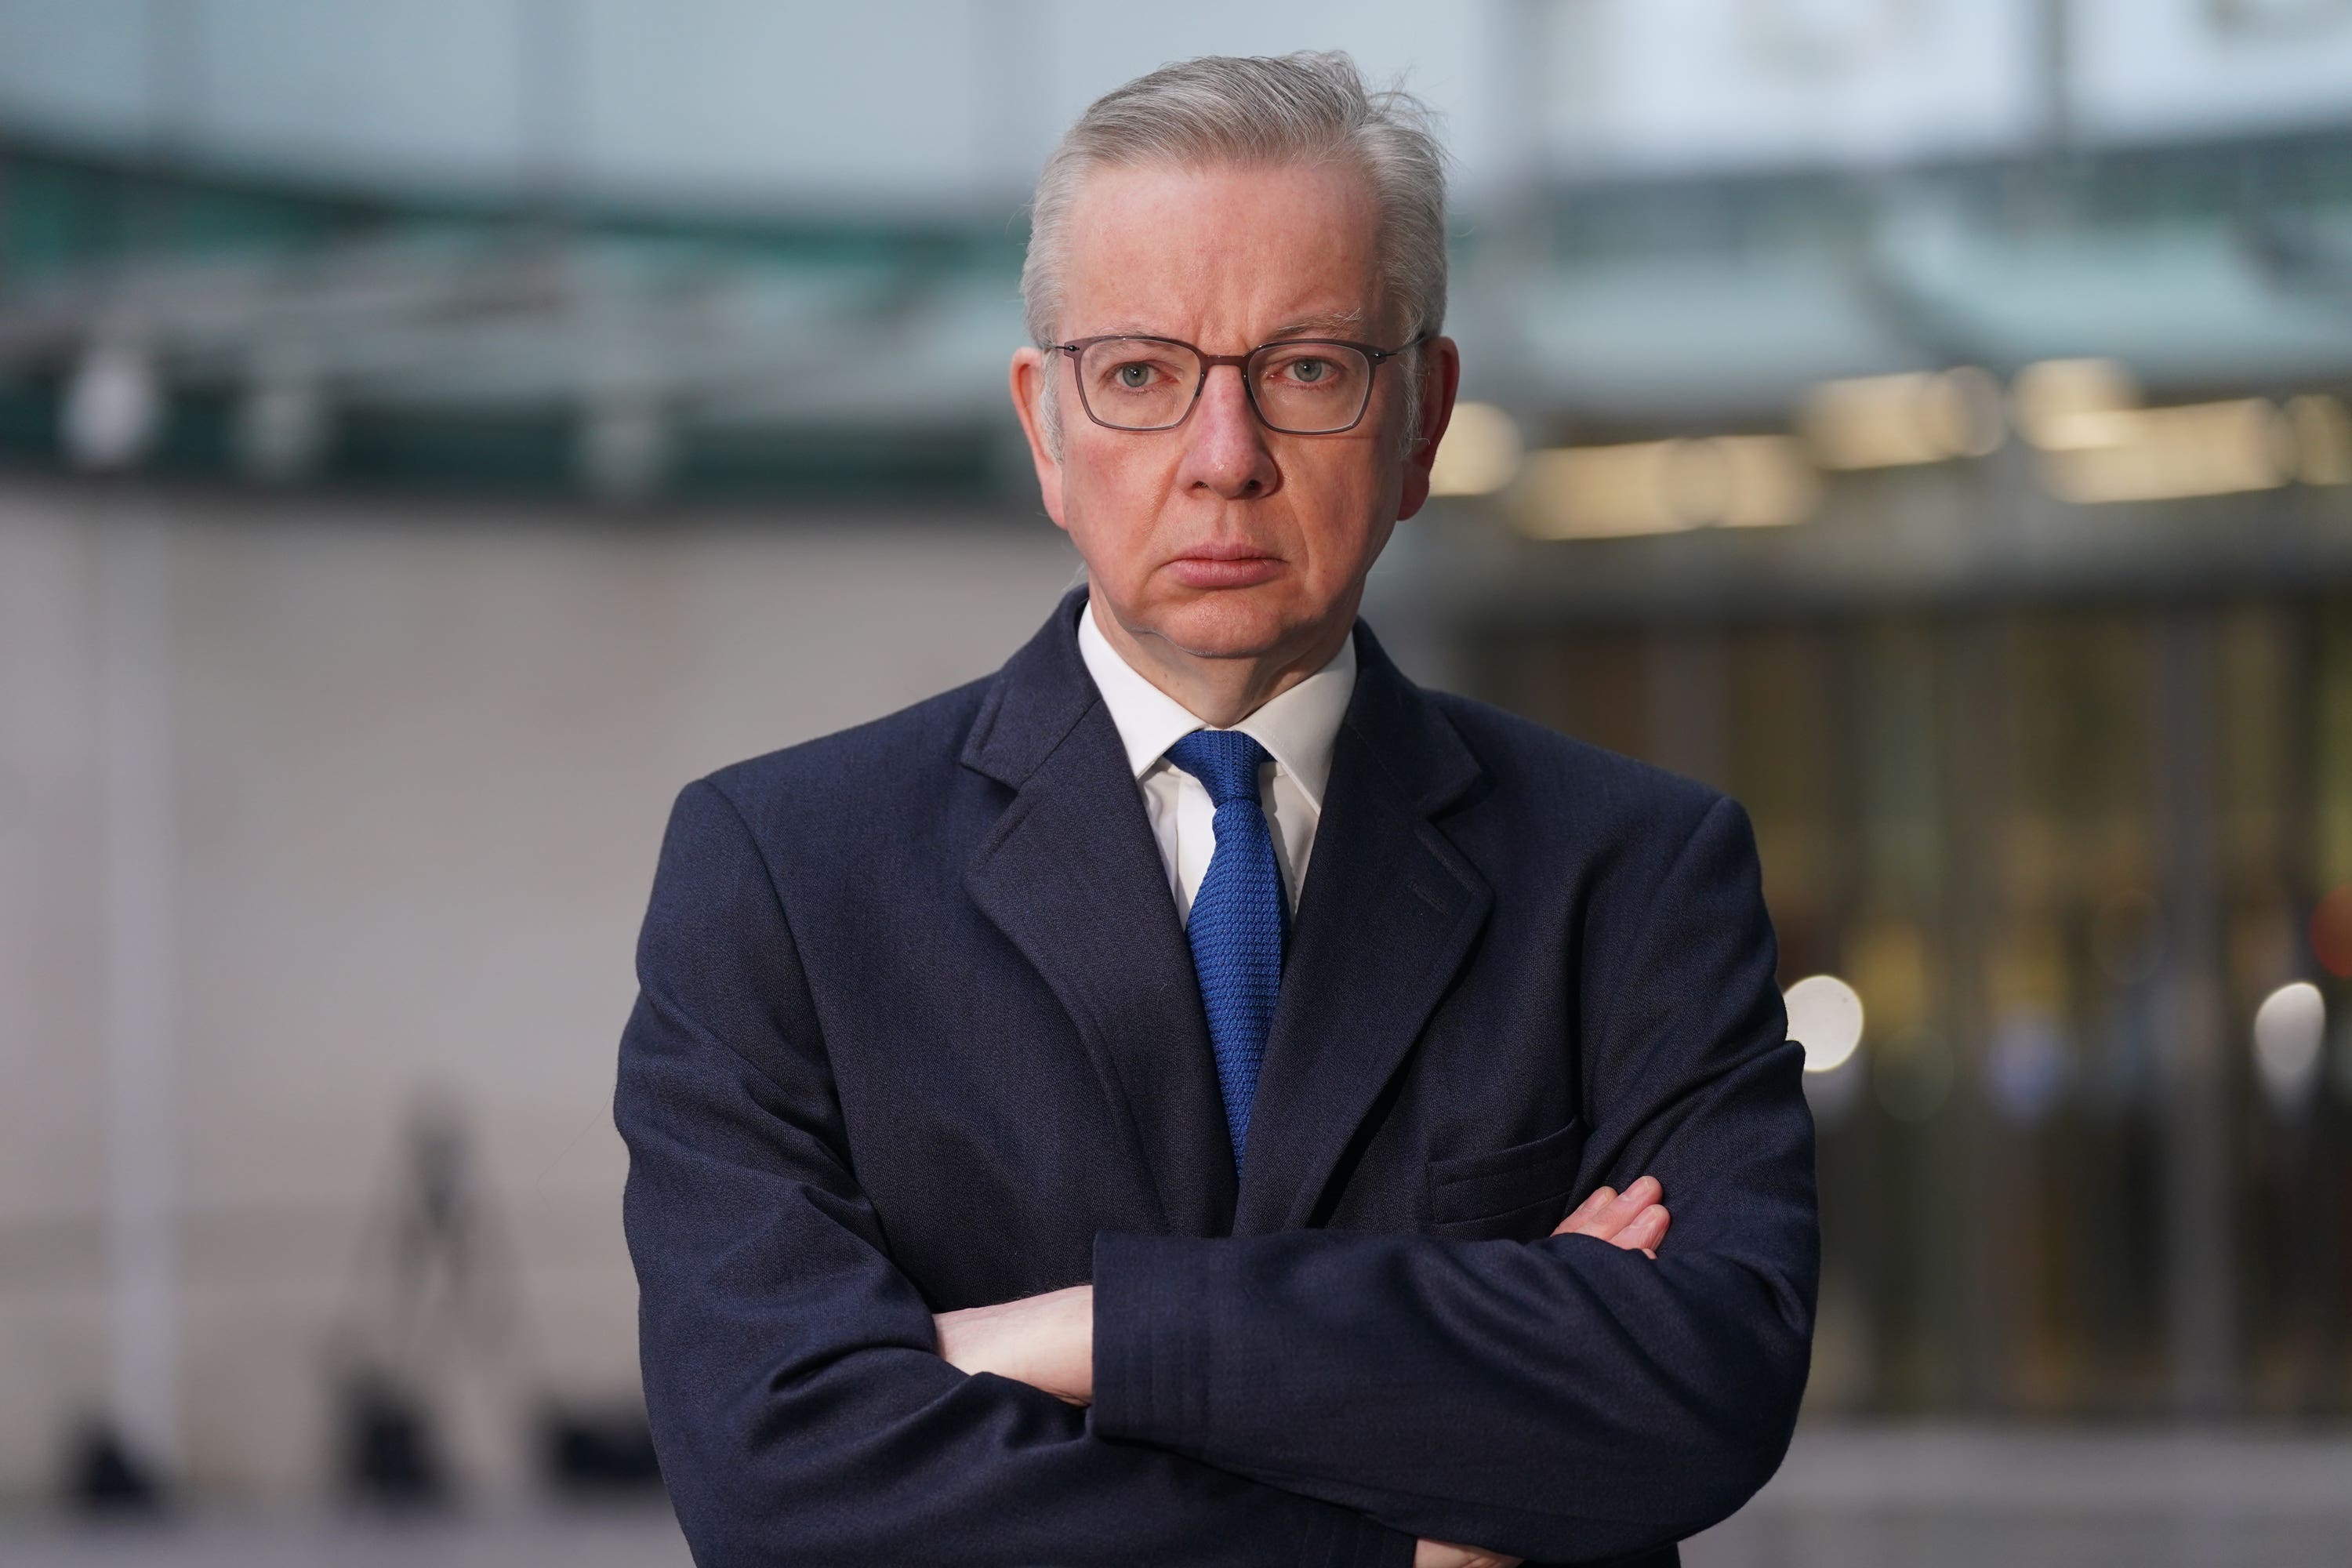 Michael Gove has announced a new definition of extremism